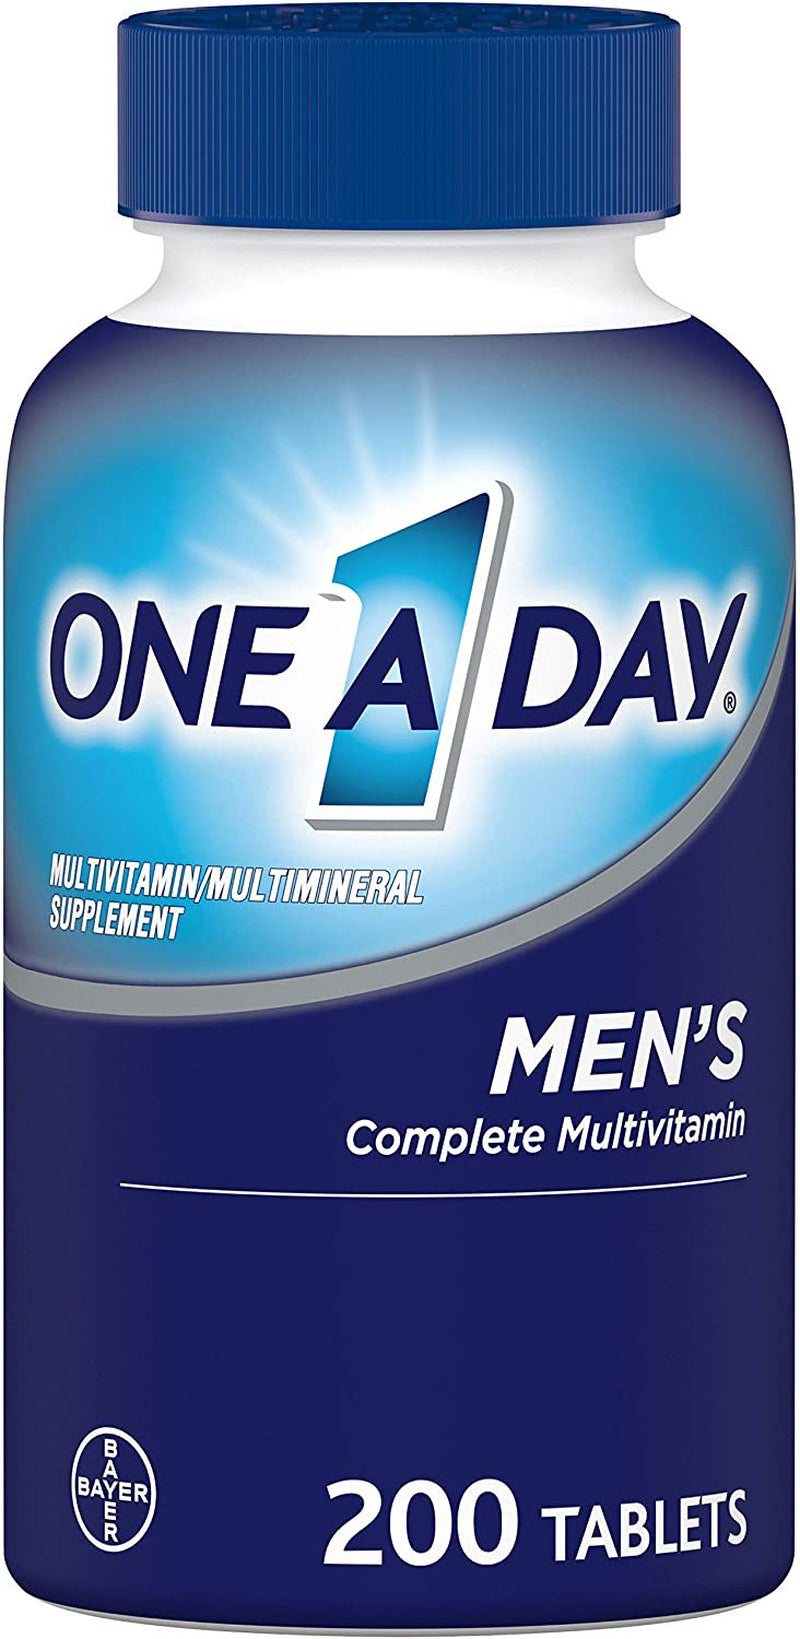 One a Day Men’S Multivitamin, Supplement with Vitamin A, Vitamin C, Vitamin D, Vitamin E and Zinc for Immune Health Support, B12, Calcium & More, 200 Count